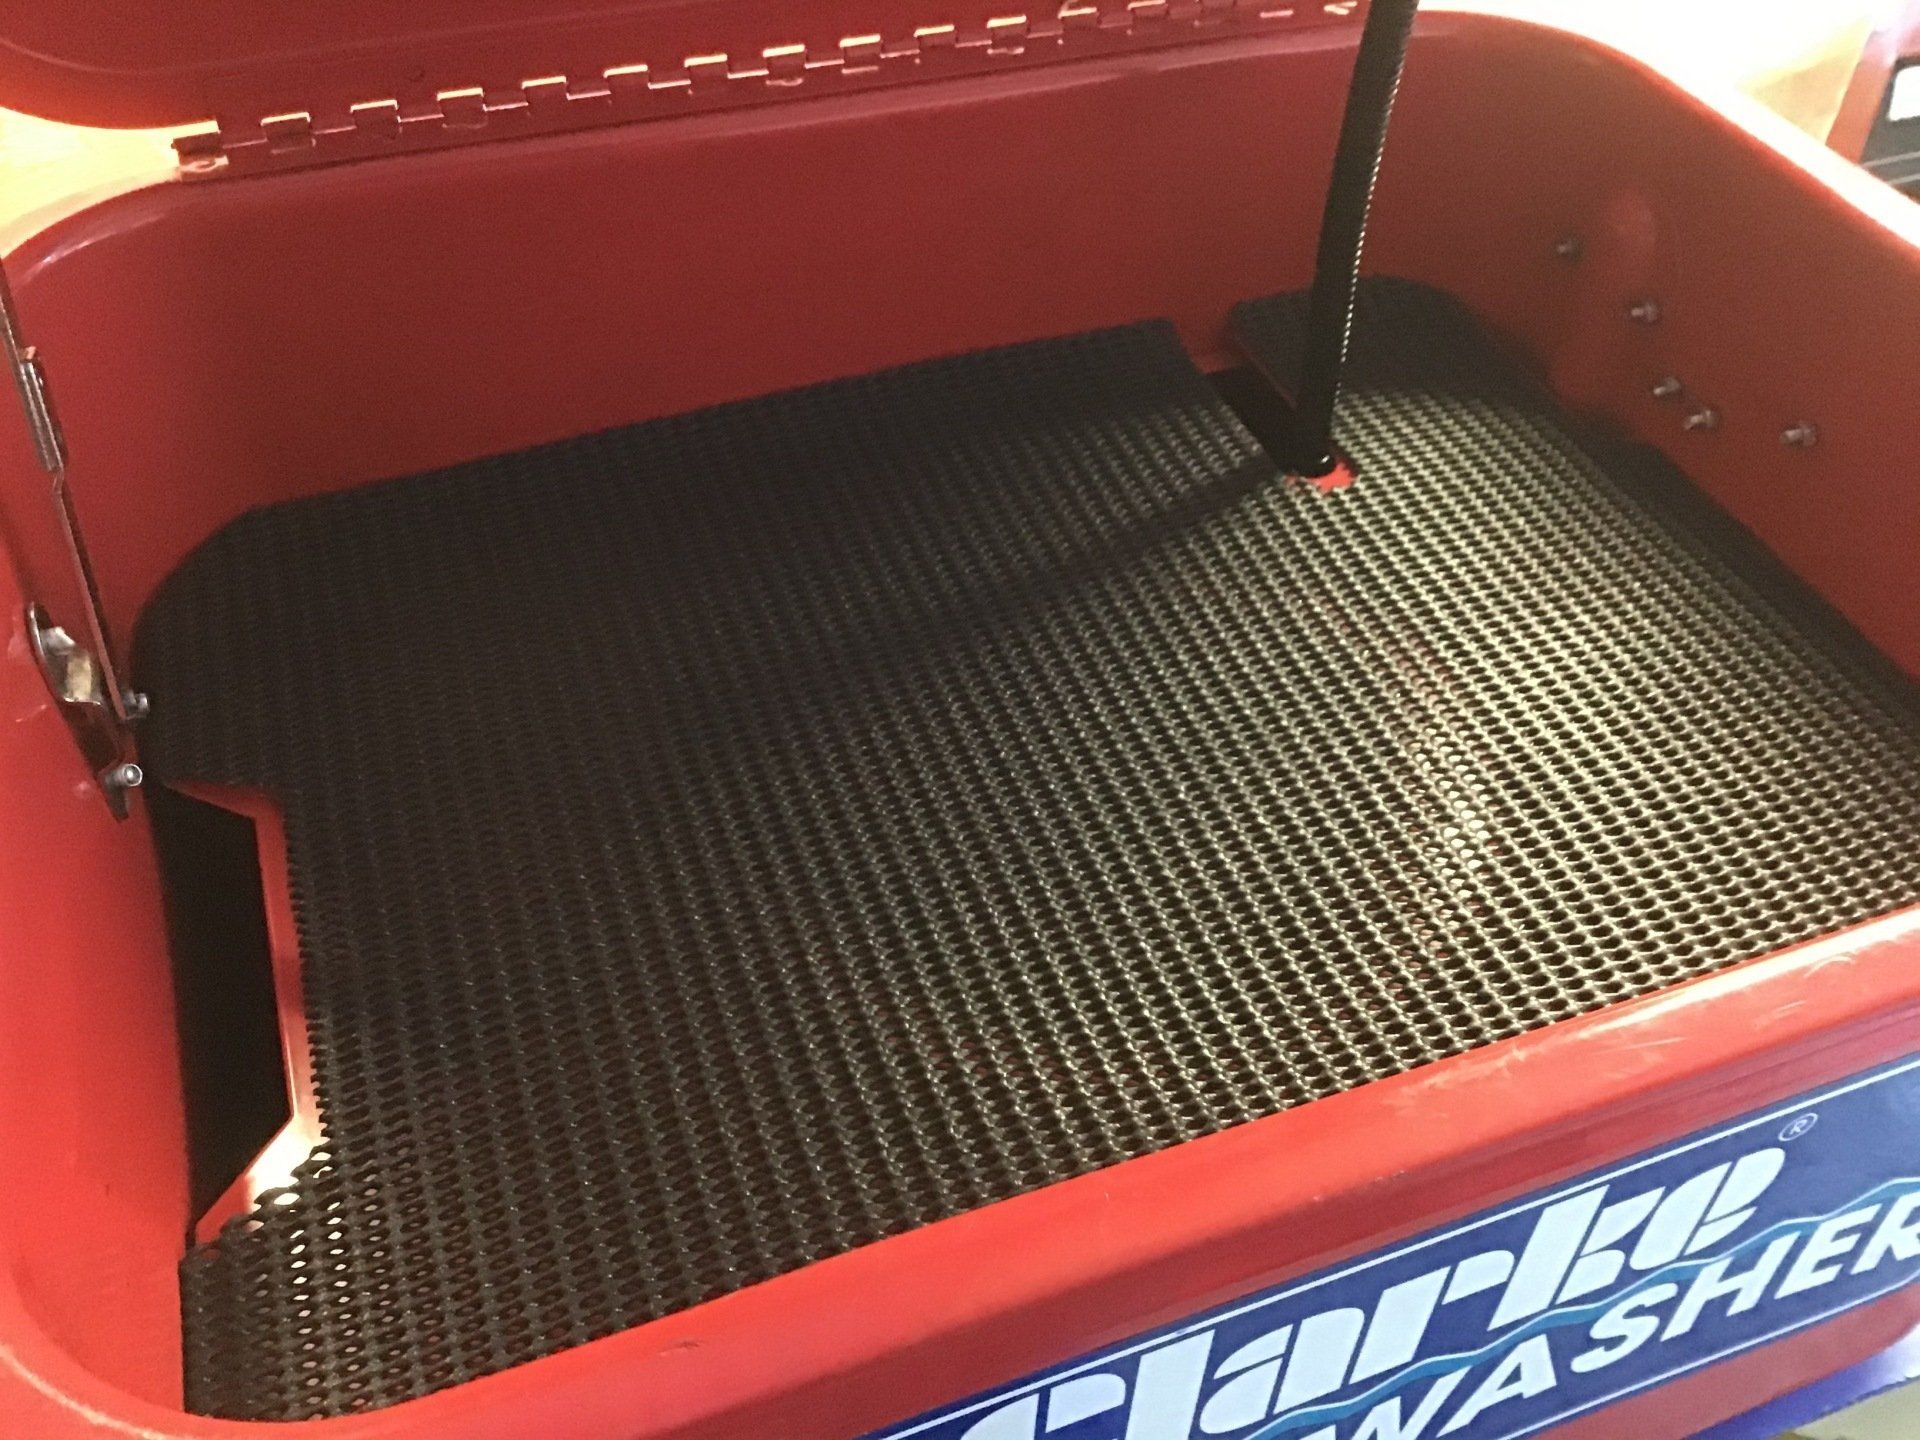 Grip mat in parts washer